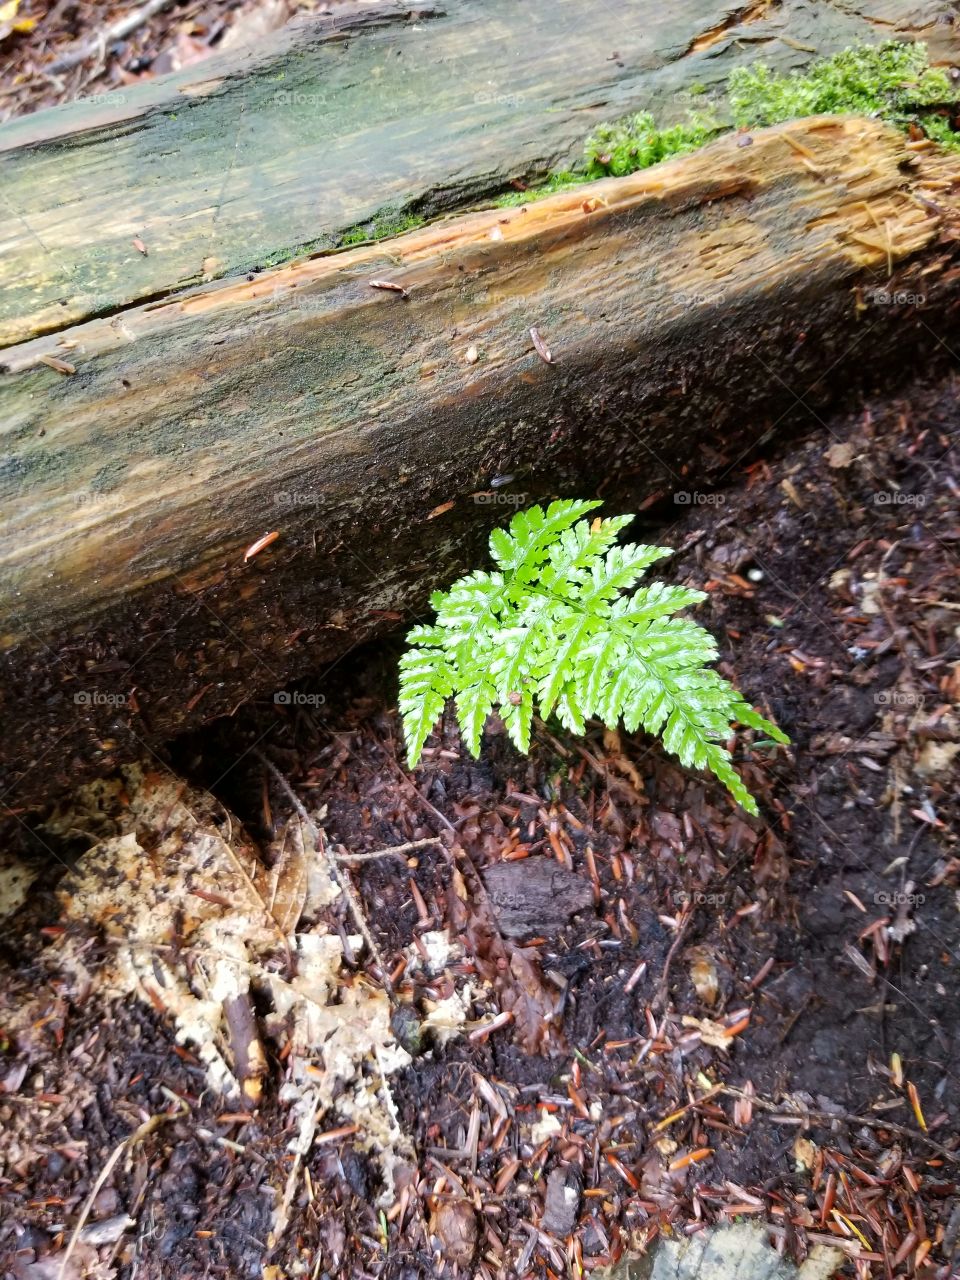 New life. Fern looks like its growing from the decaying tree.